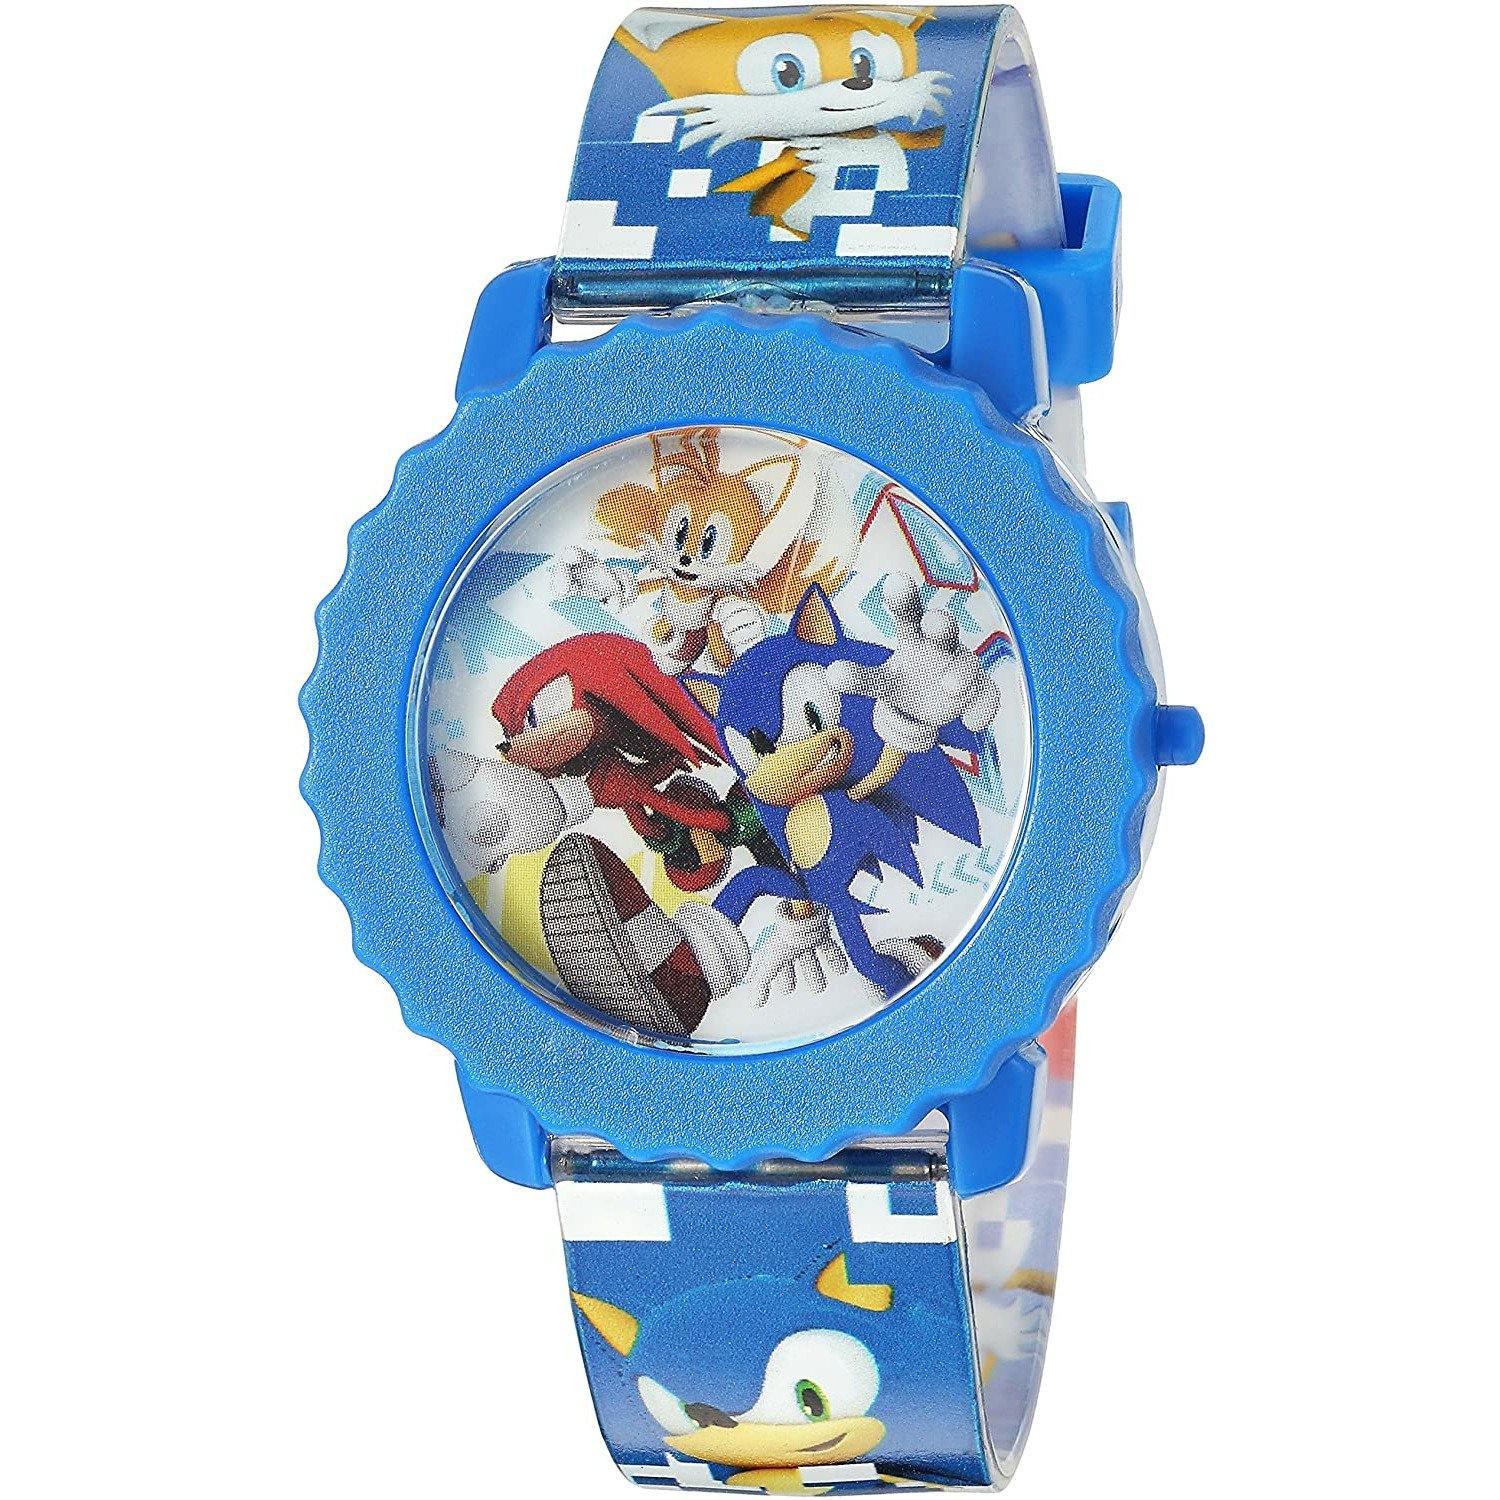 Sonic the Hedgehog Kid's Quartz Watch with Plastic Strap, Blue, (Model: SNC4028) - BumbleToys - 5-7 Years, Boys, OXE, Pre-Order, Sonic, Wrist Watches